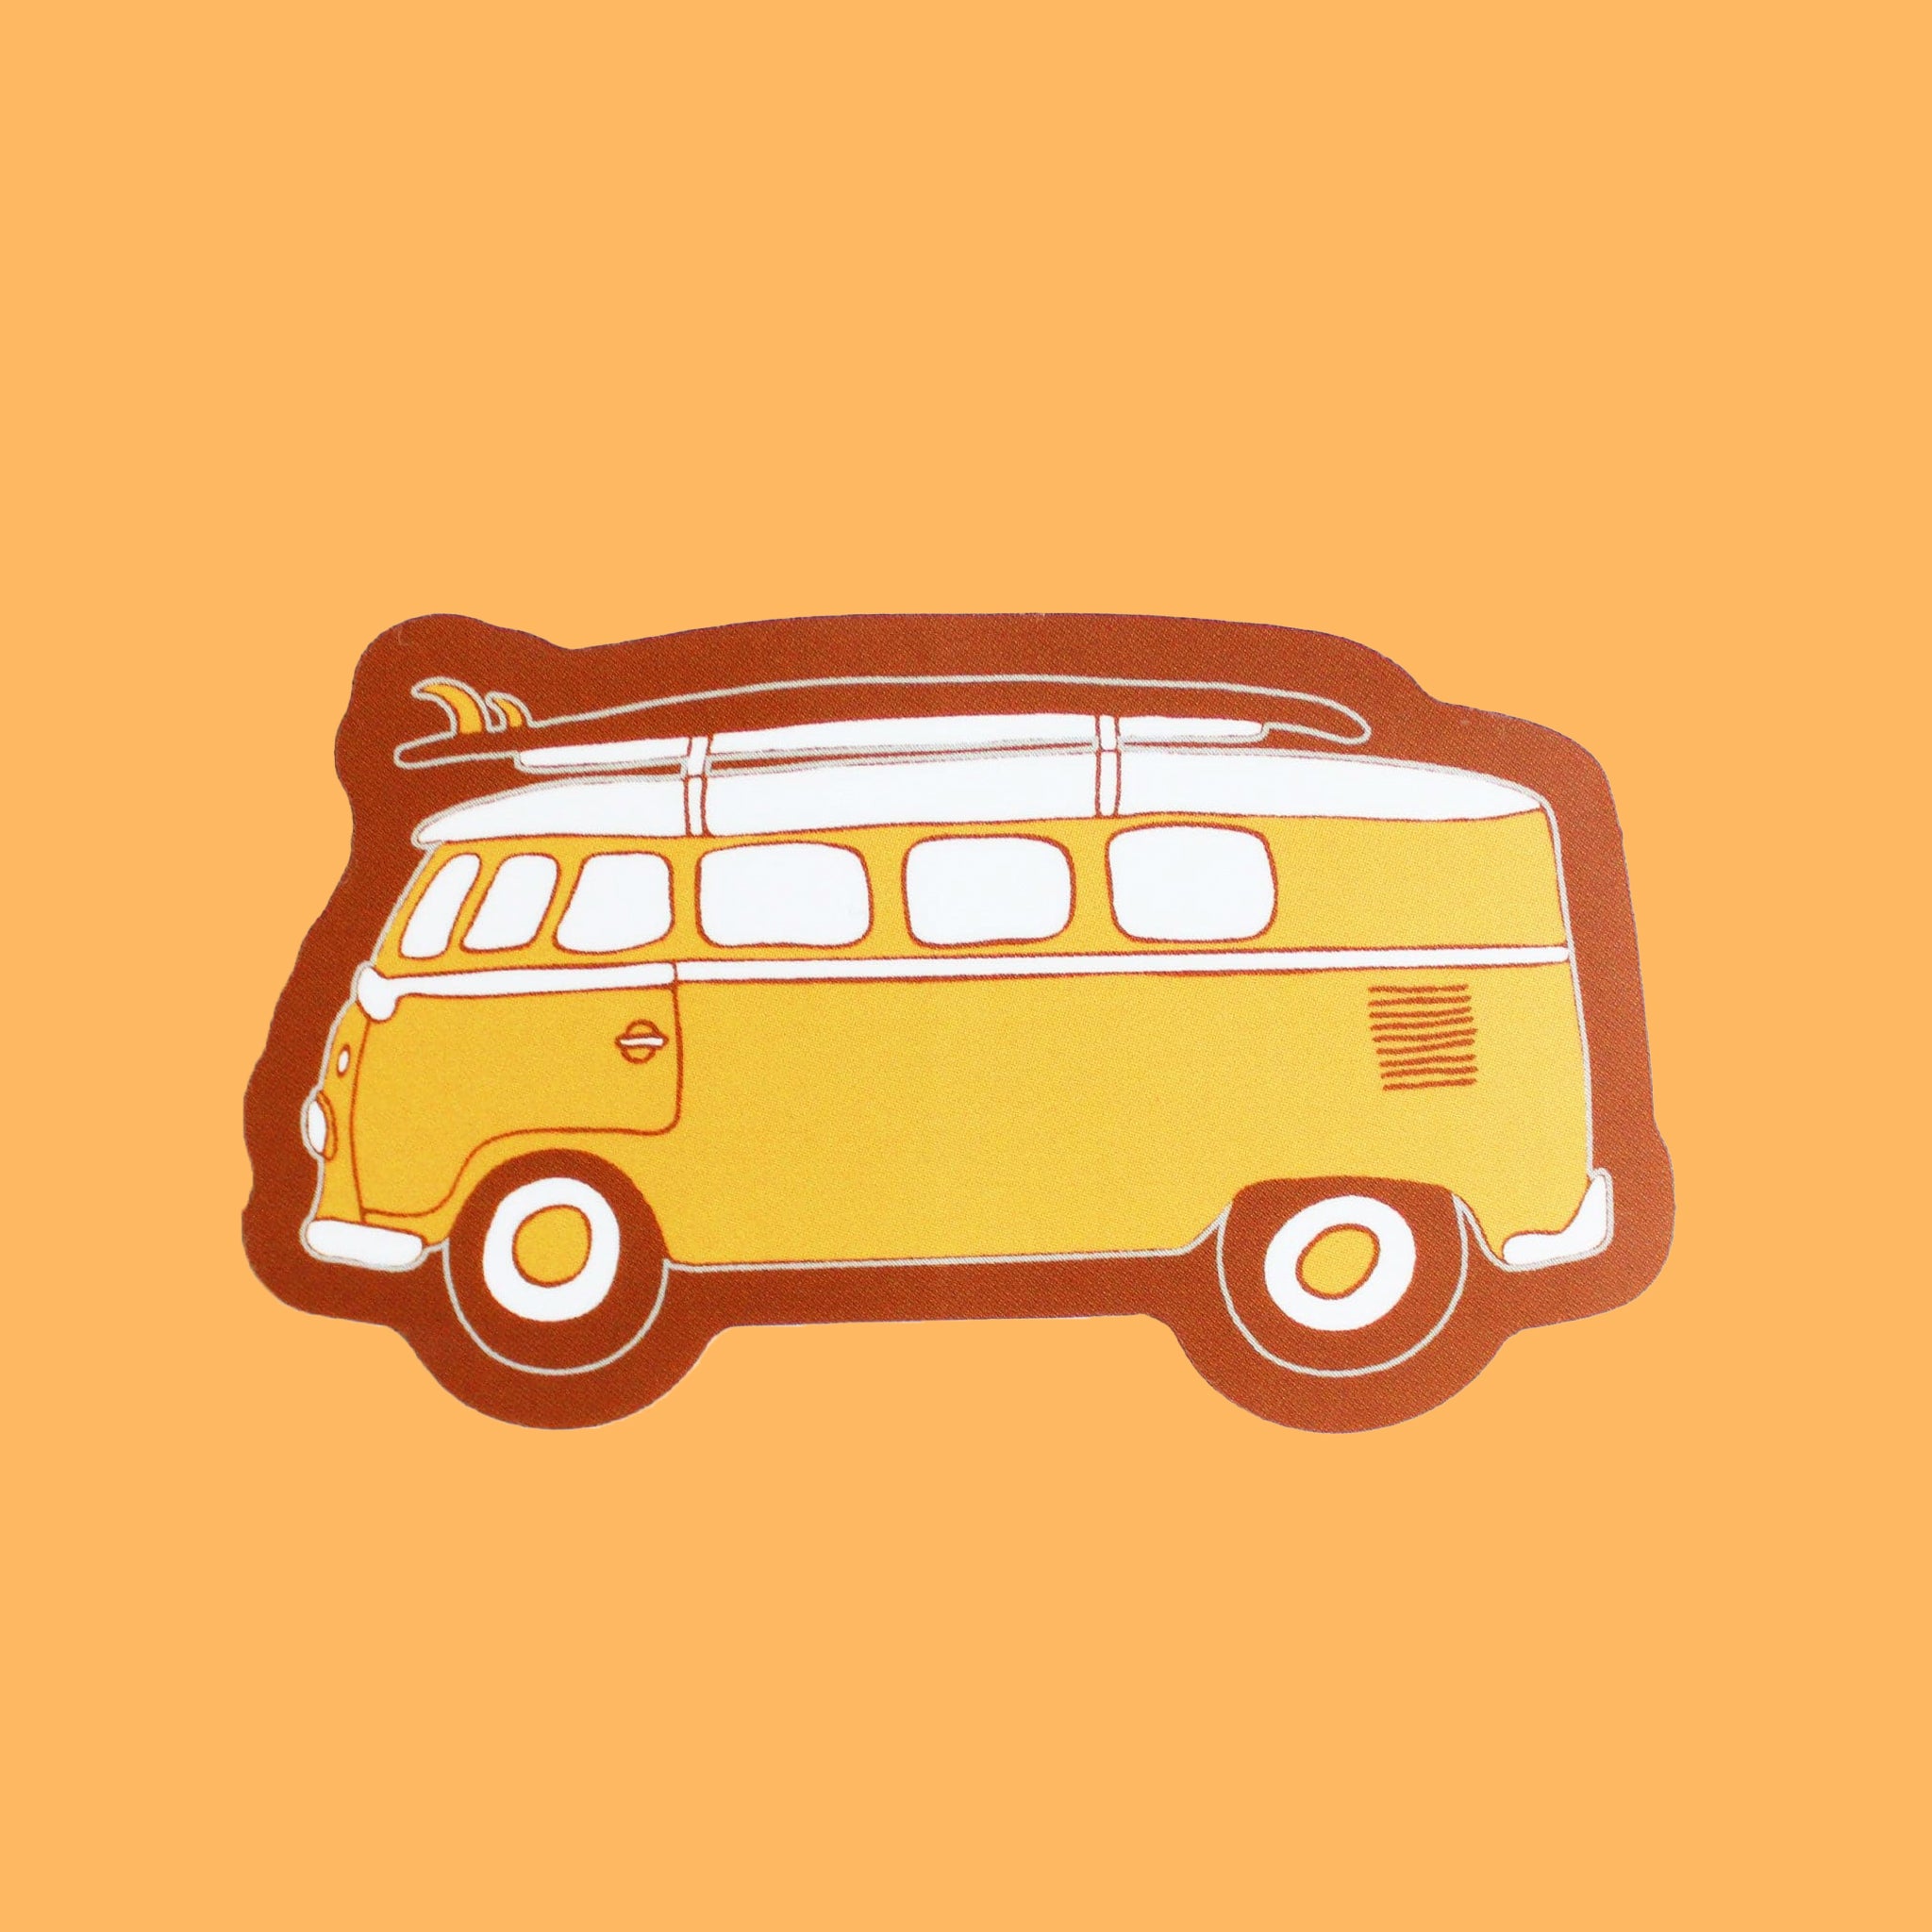 This vinyl sticker has a classic daffodil yellow VW Bug with a surfboard fastened on top, providing that classic beach cruiser vibe. The sticker has tawny brown bubble border.